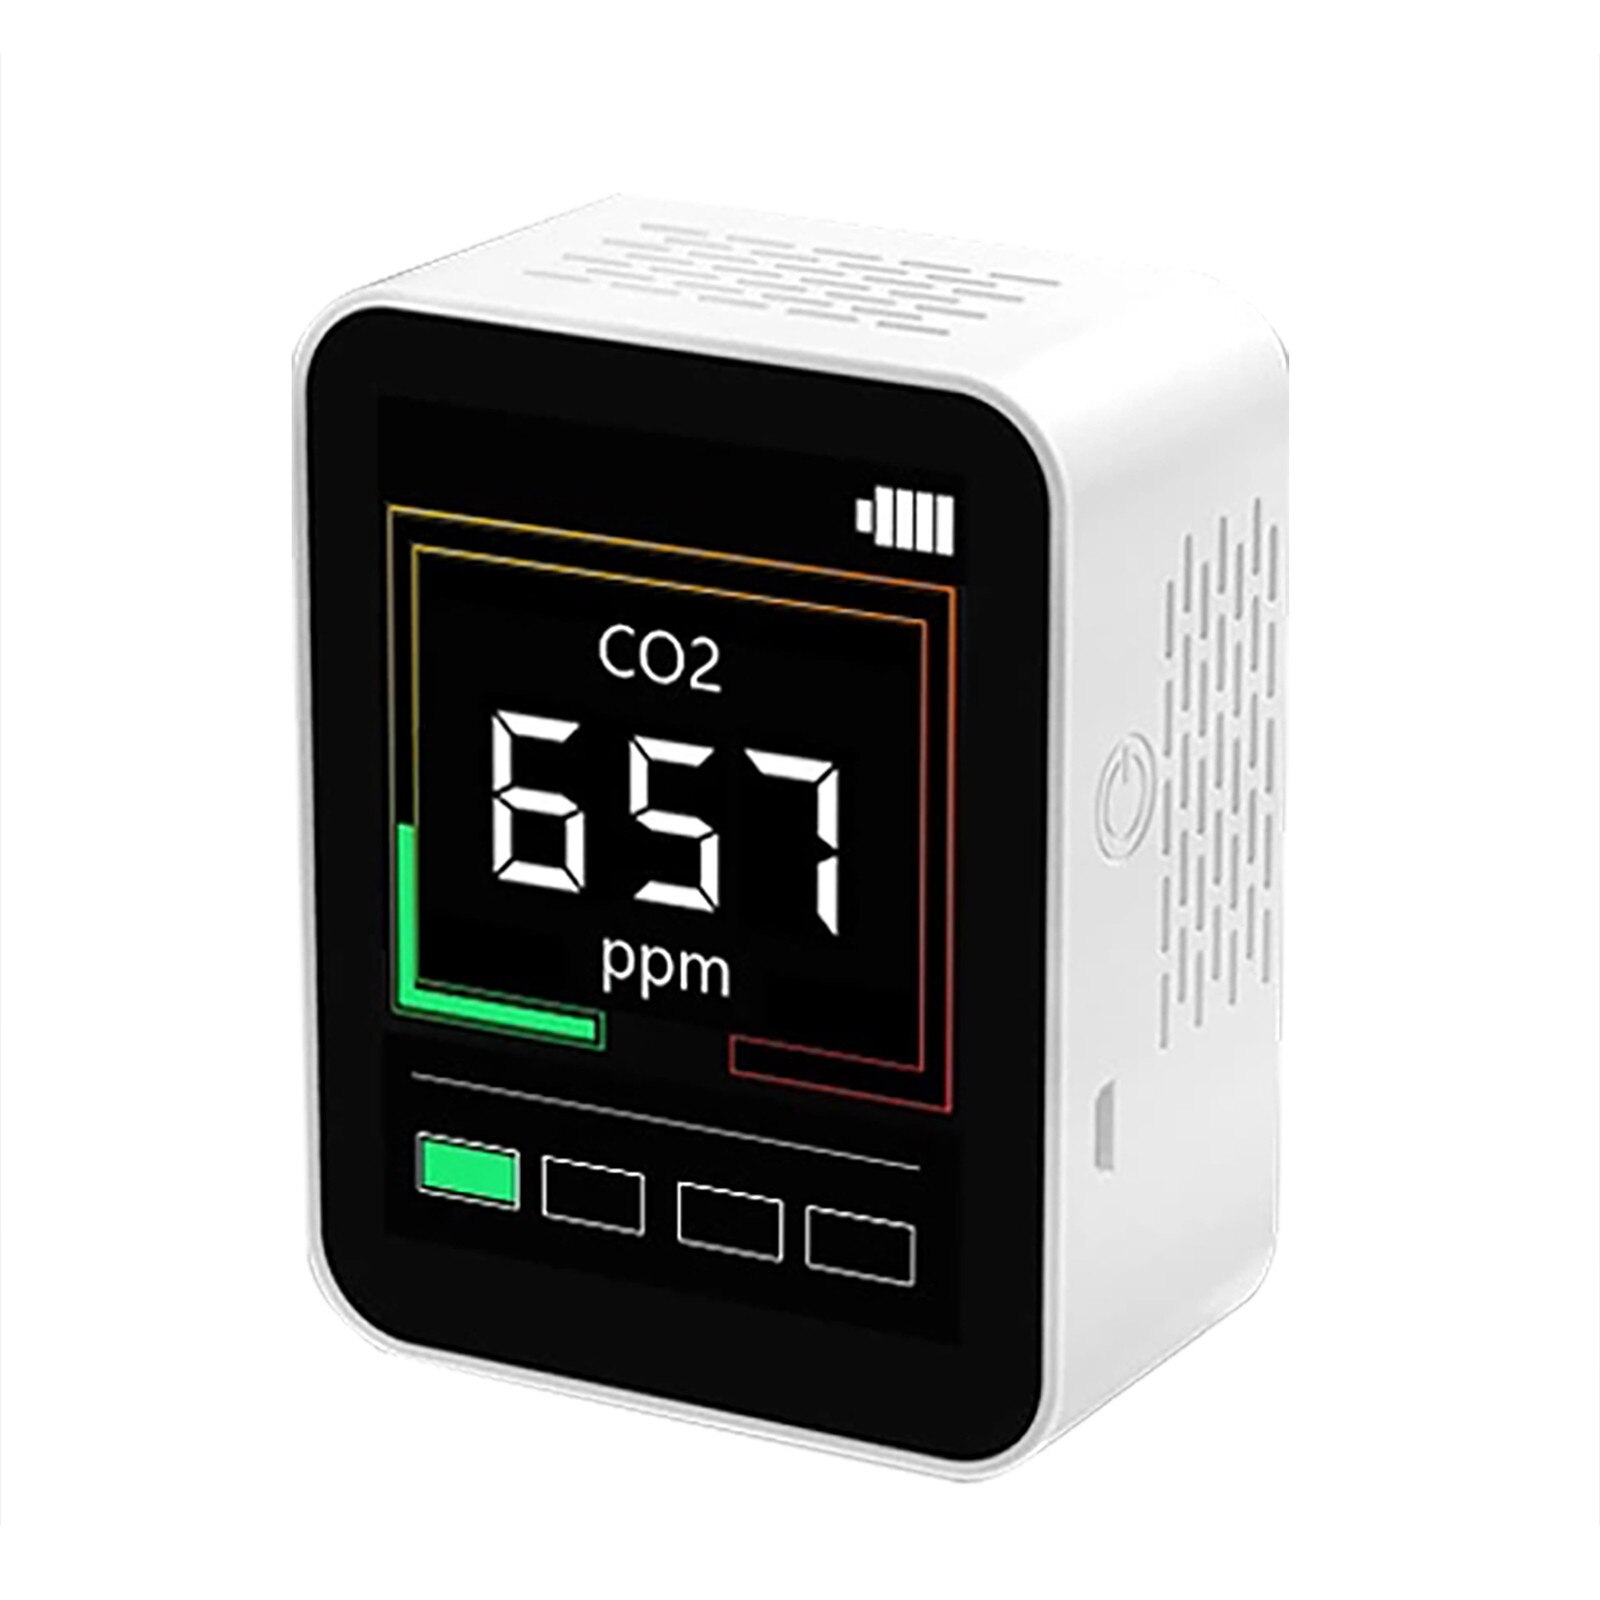 Carbon Dioxide Detector Gas Concentration Content Color Screen Intelligence Co2 Meter Detector Digital Air Monitor: A2